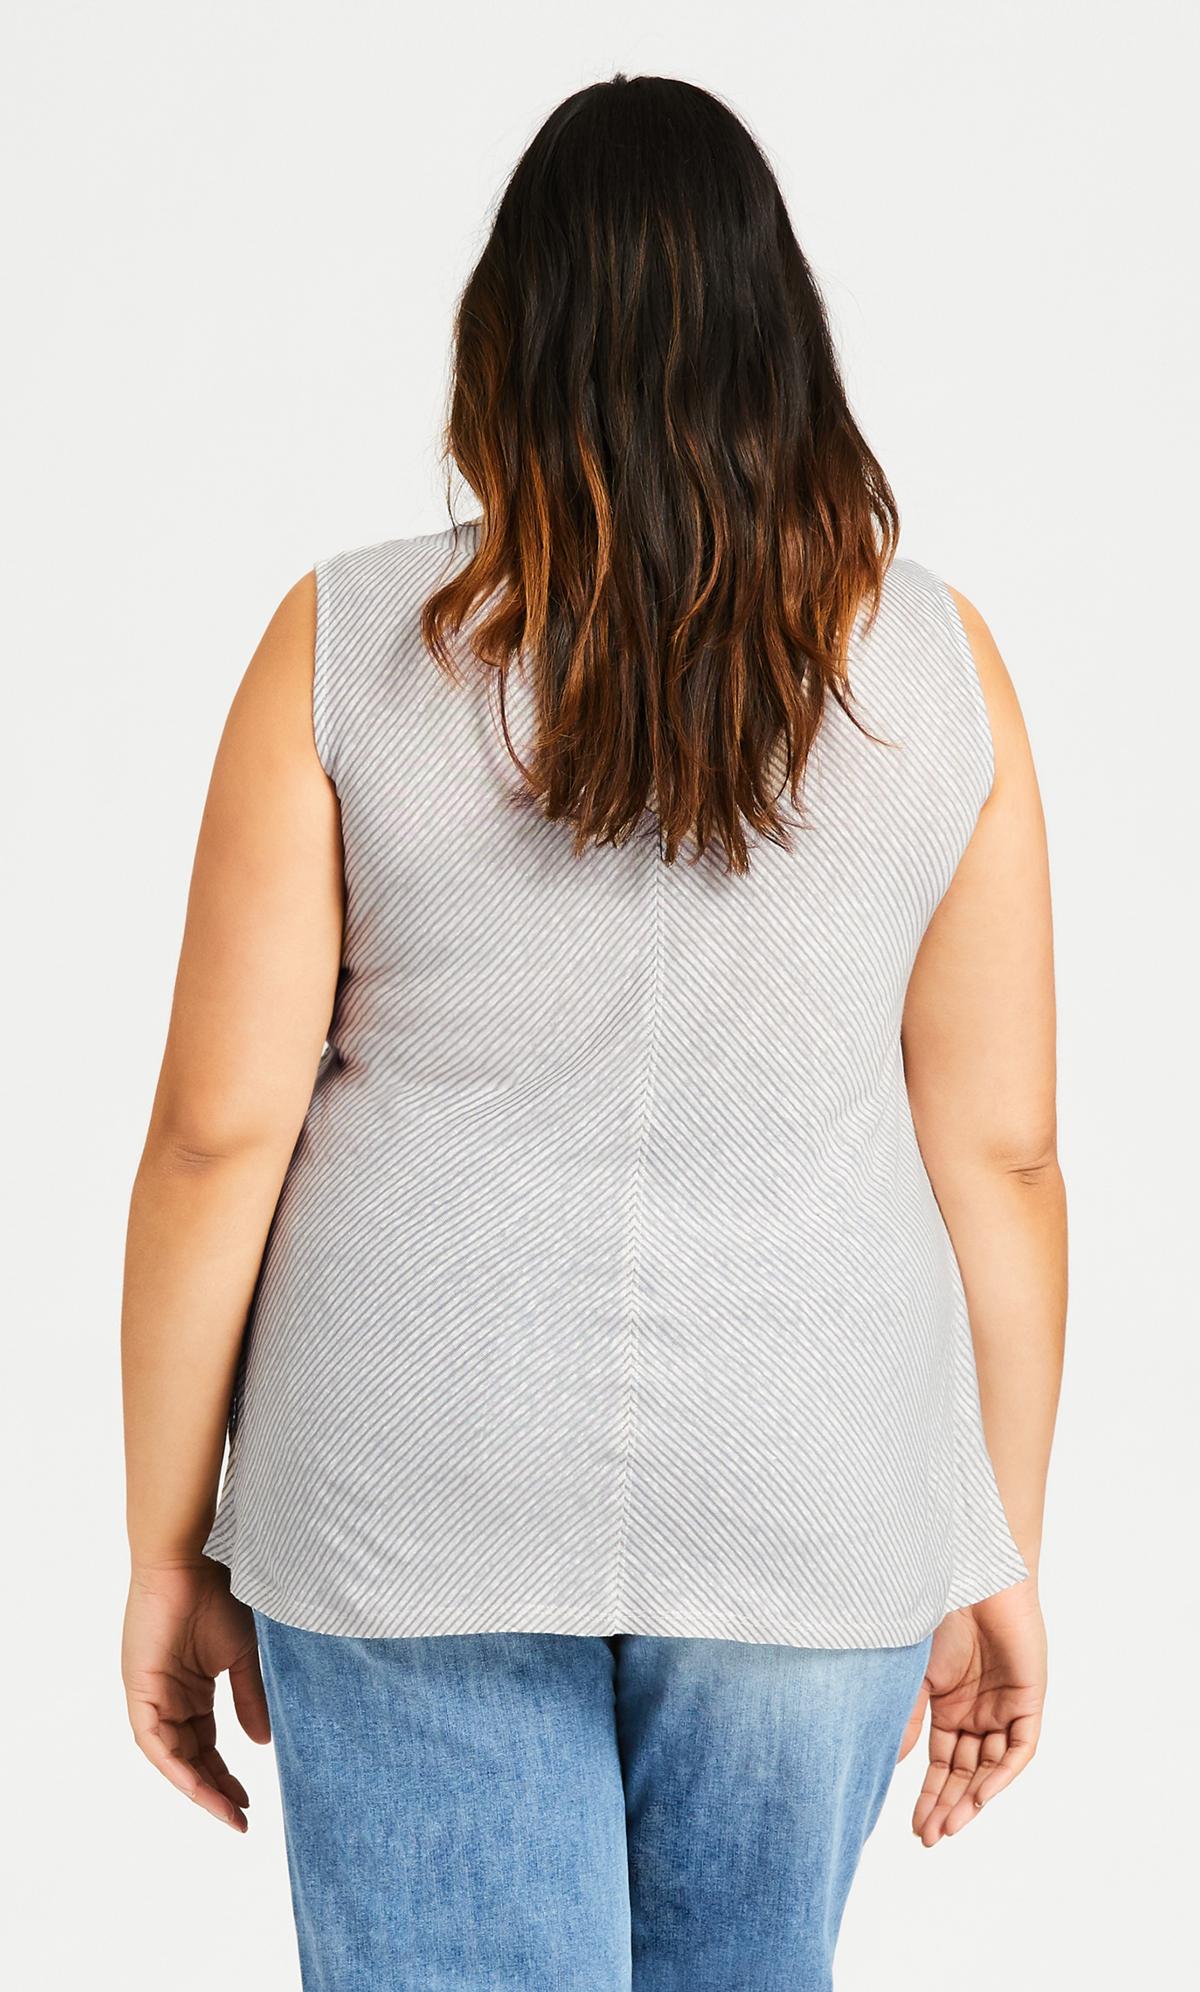 Inverted V Sleeveless Charcoal Top 3